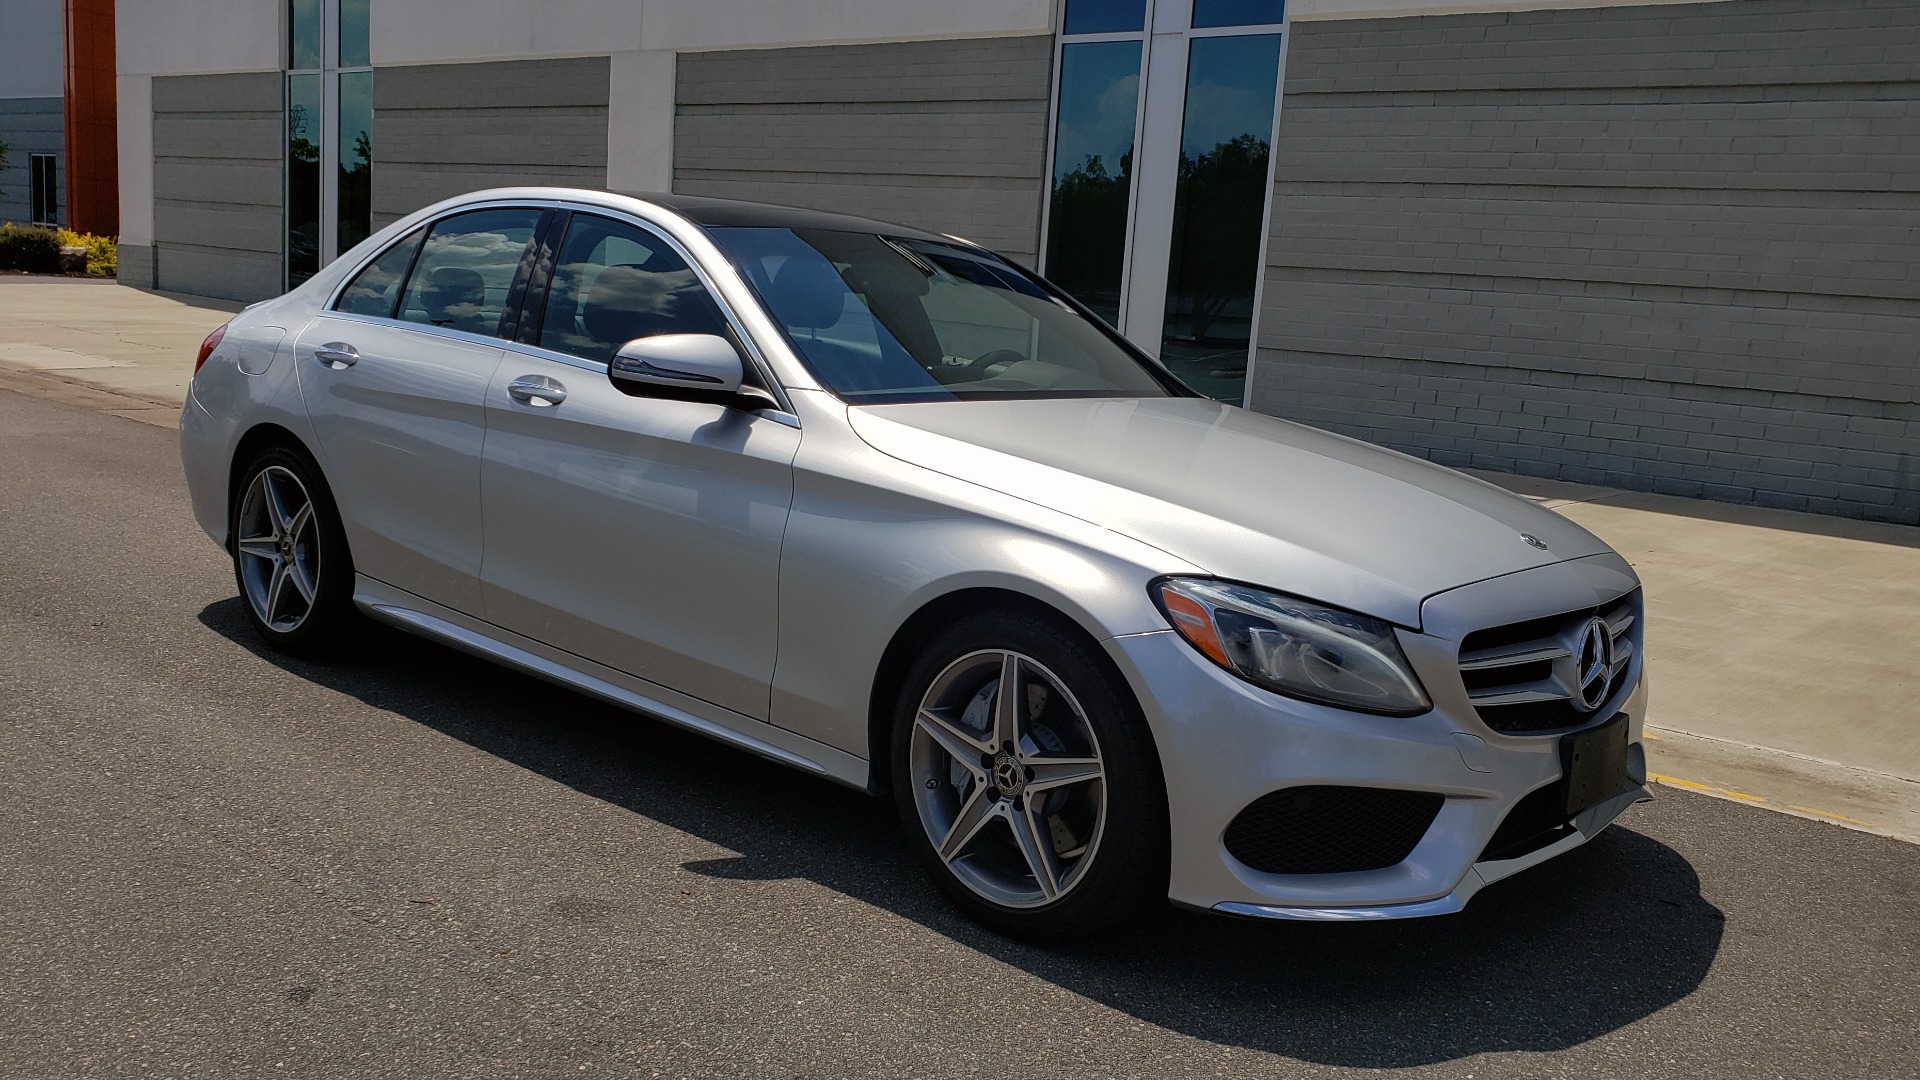 Used 2018 Mercedes-Benz C-CLASS C 300 4MATIC / PREMIUM PKG / PANO-ROOF / AMG LINE / BURMESTER / REARVIEW for sale Sold at Formula Imports in Charlotte NC 28227 6